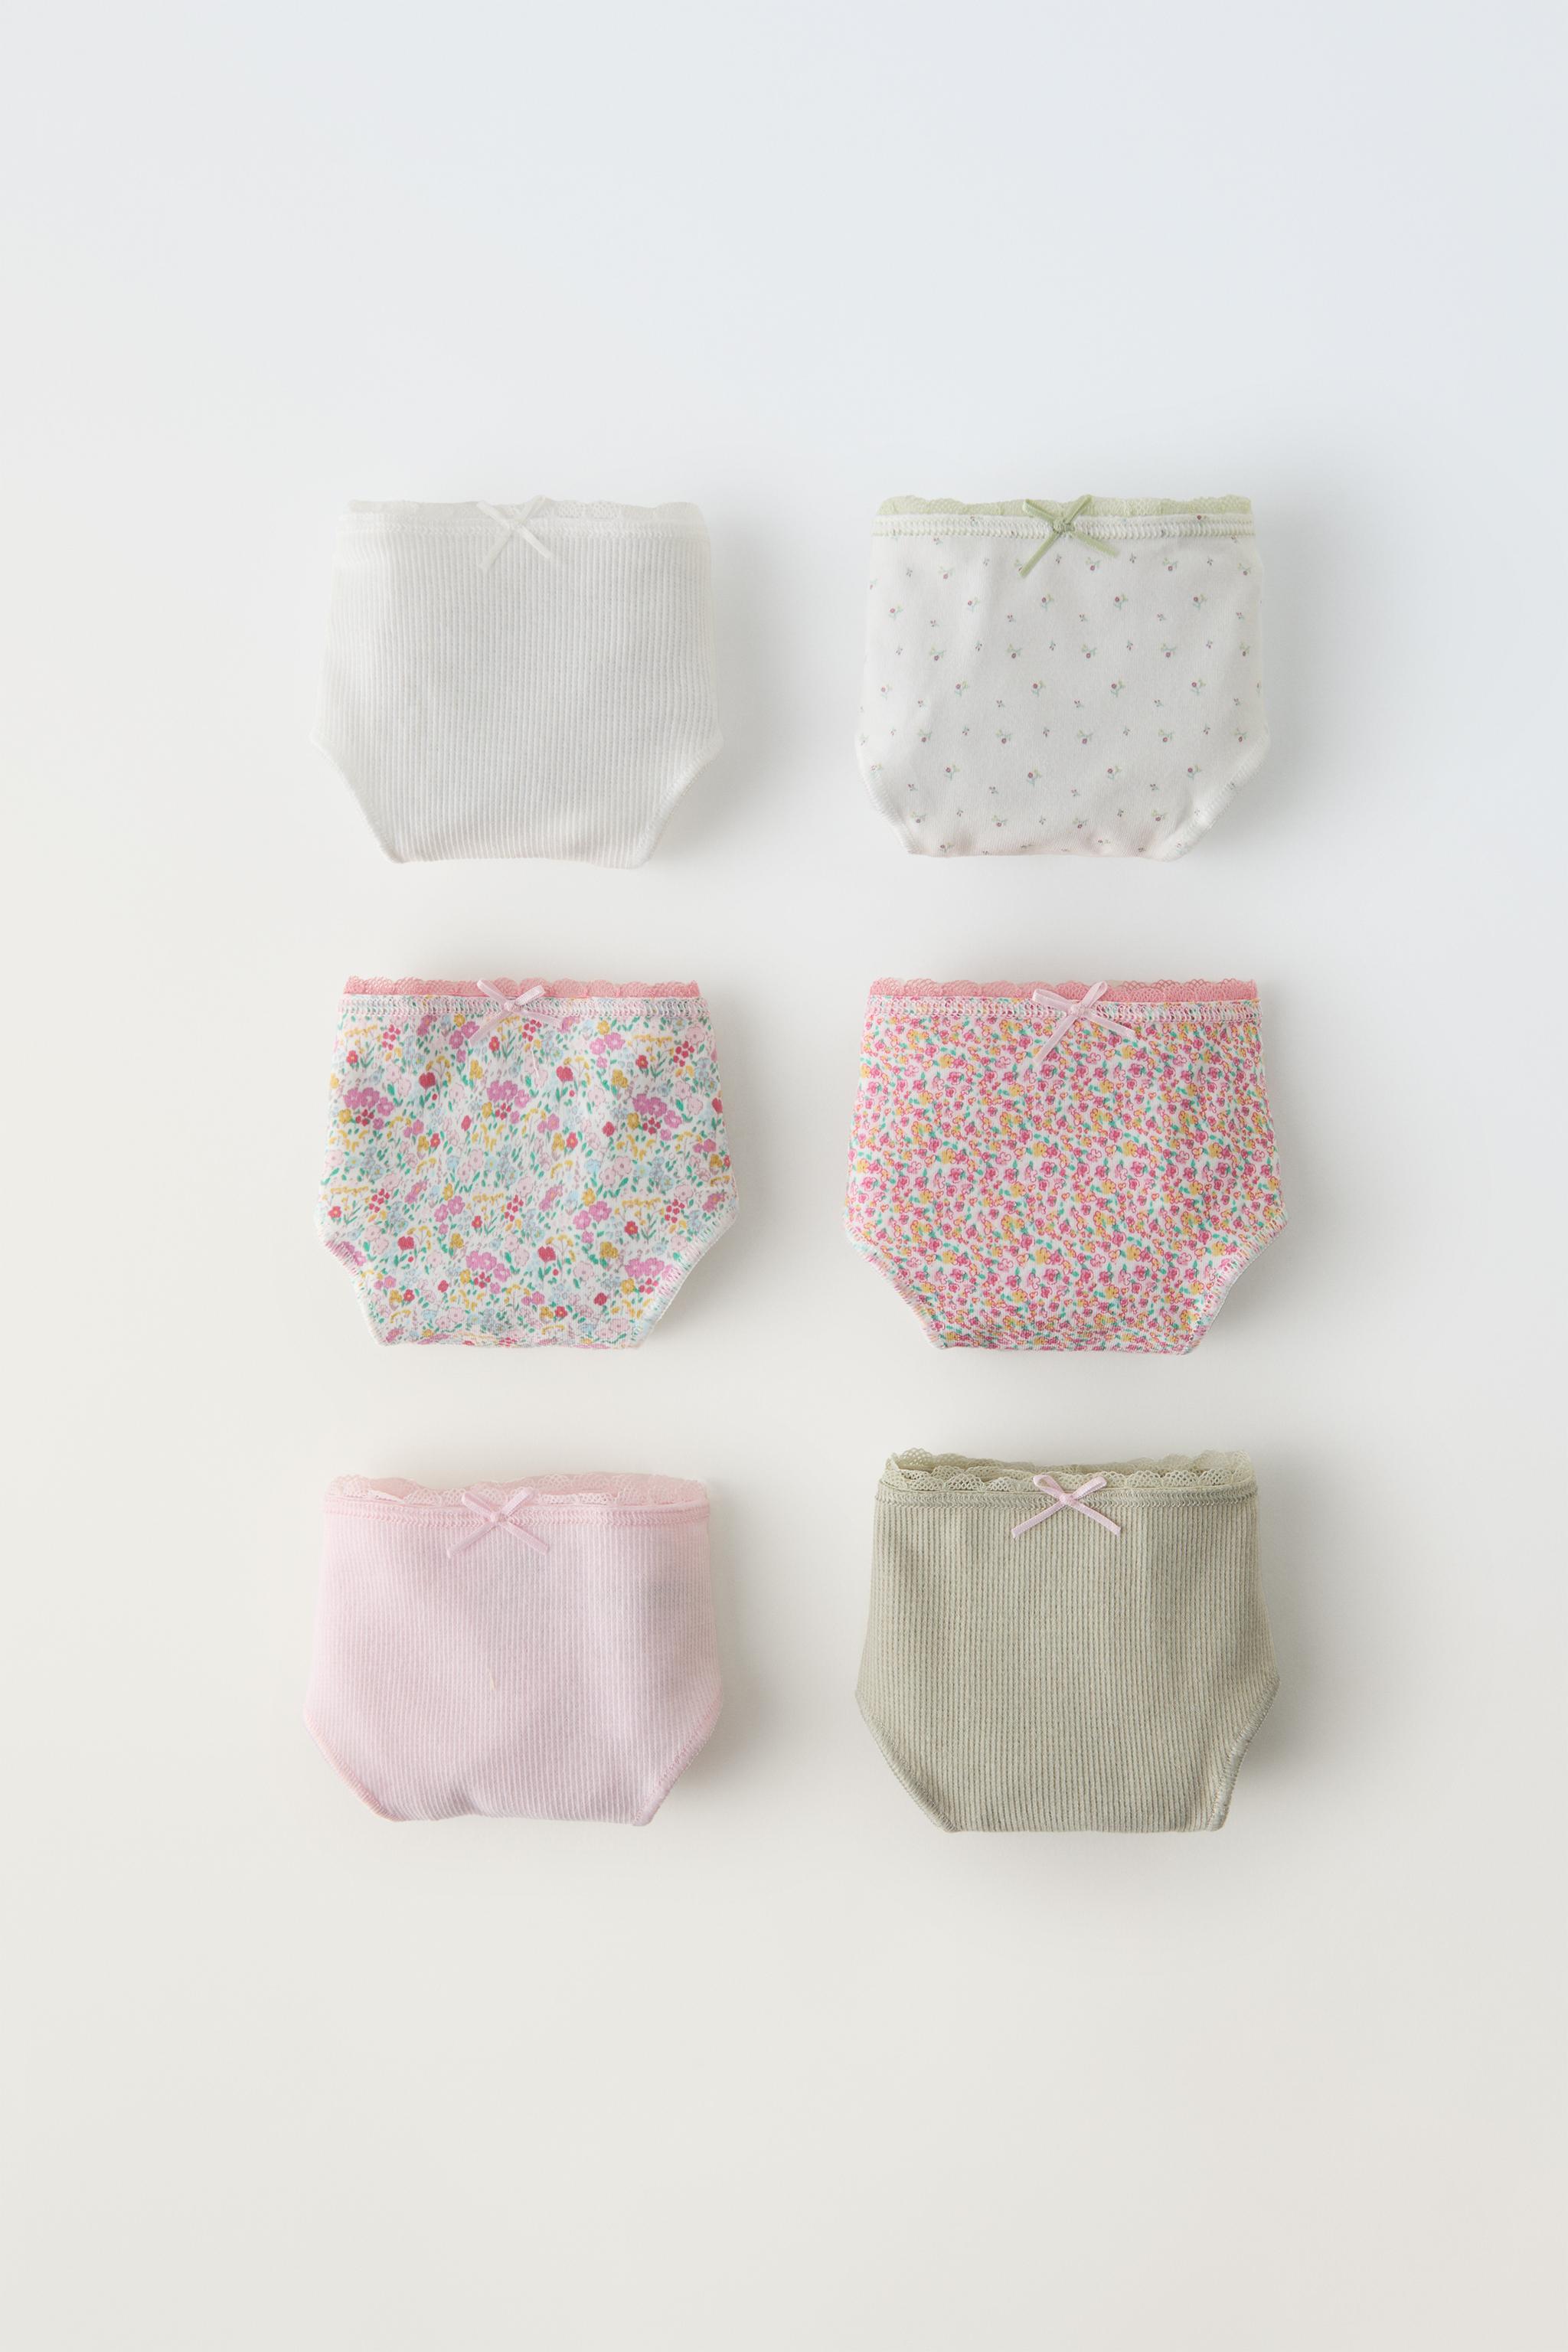 2-14 YEARS/ SIX-PACK OF FLORAL UNDERWEAR - Pinks